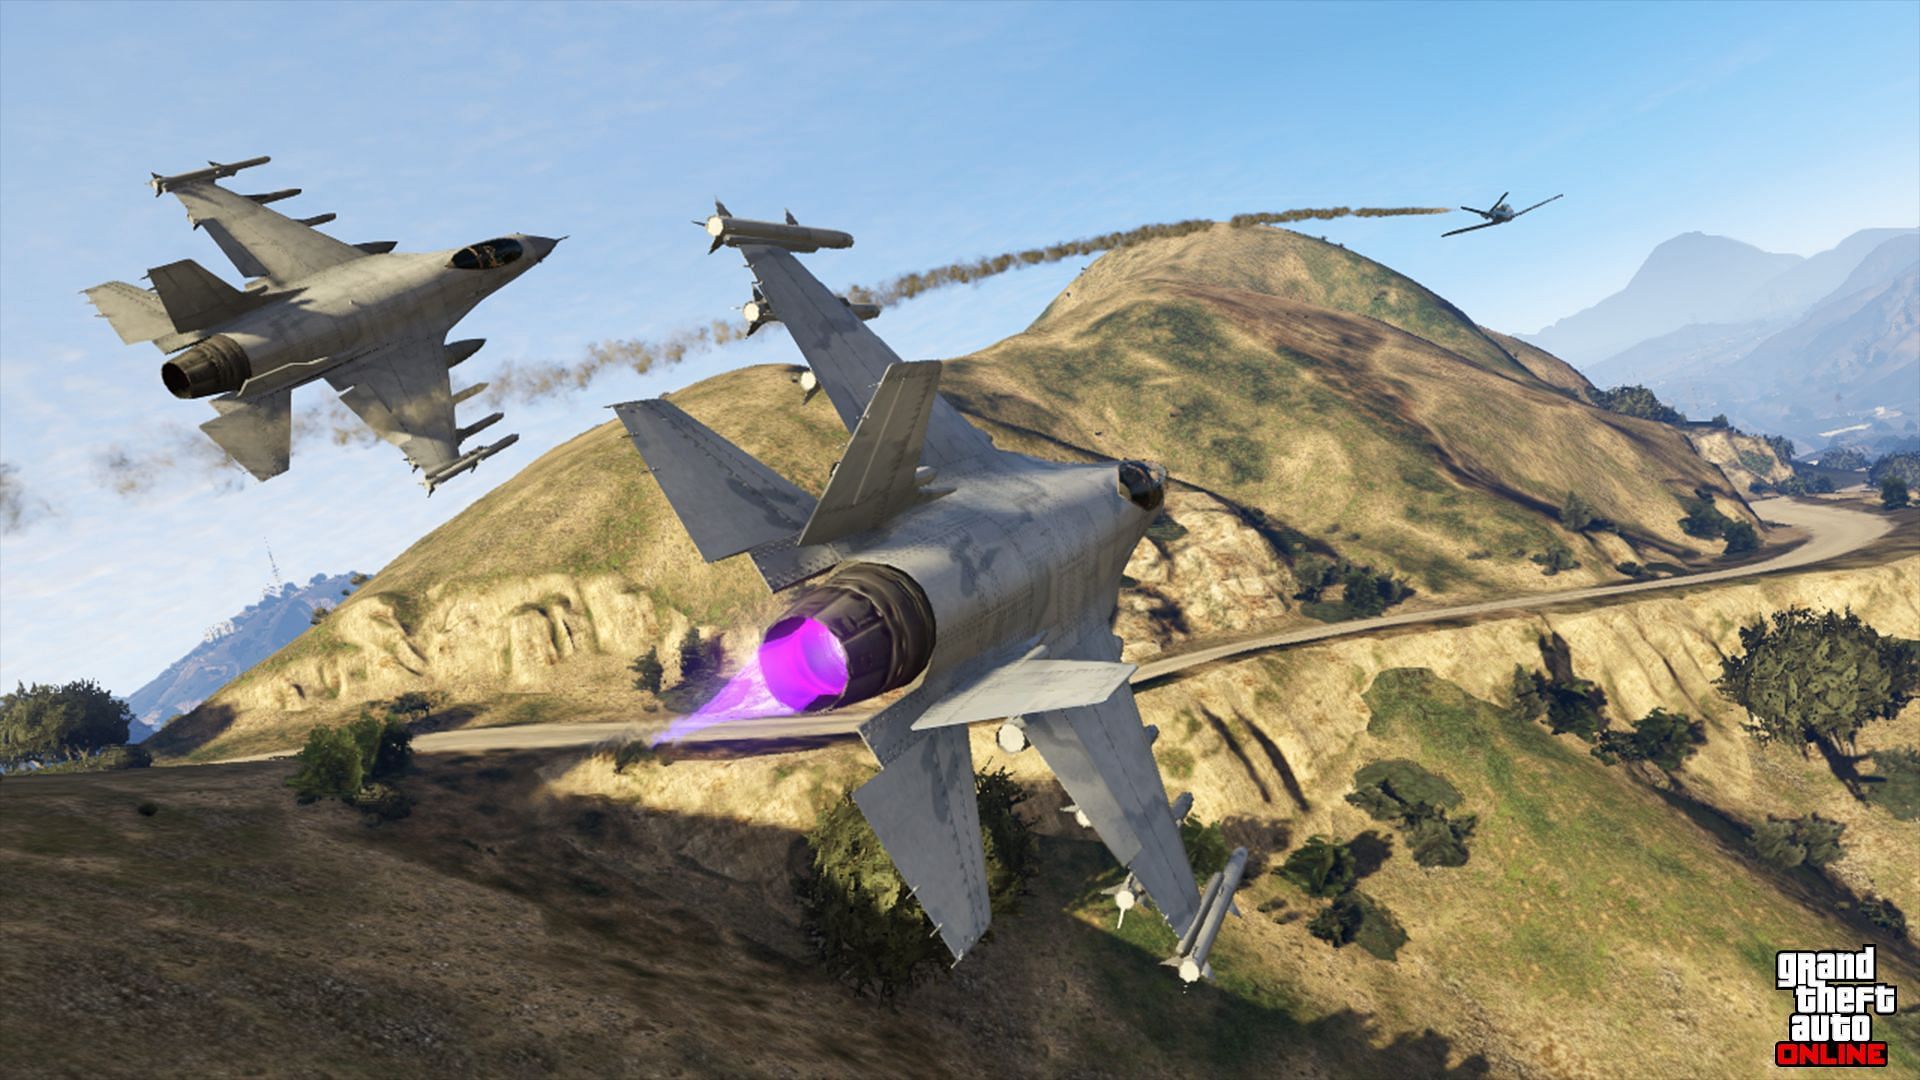 GTA Online has a large roster of missions available to its players (Image via Rockstar Games)